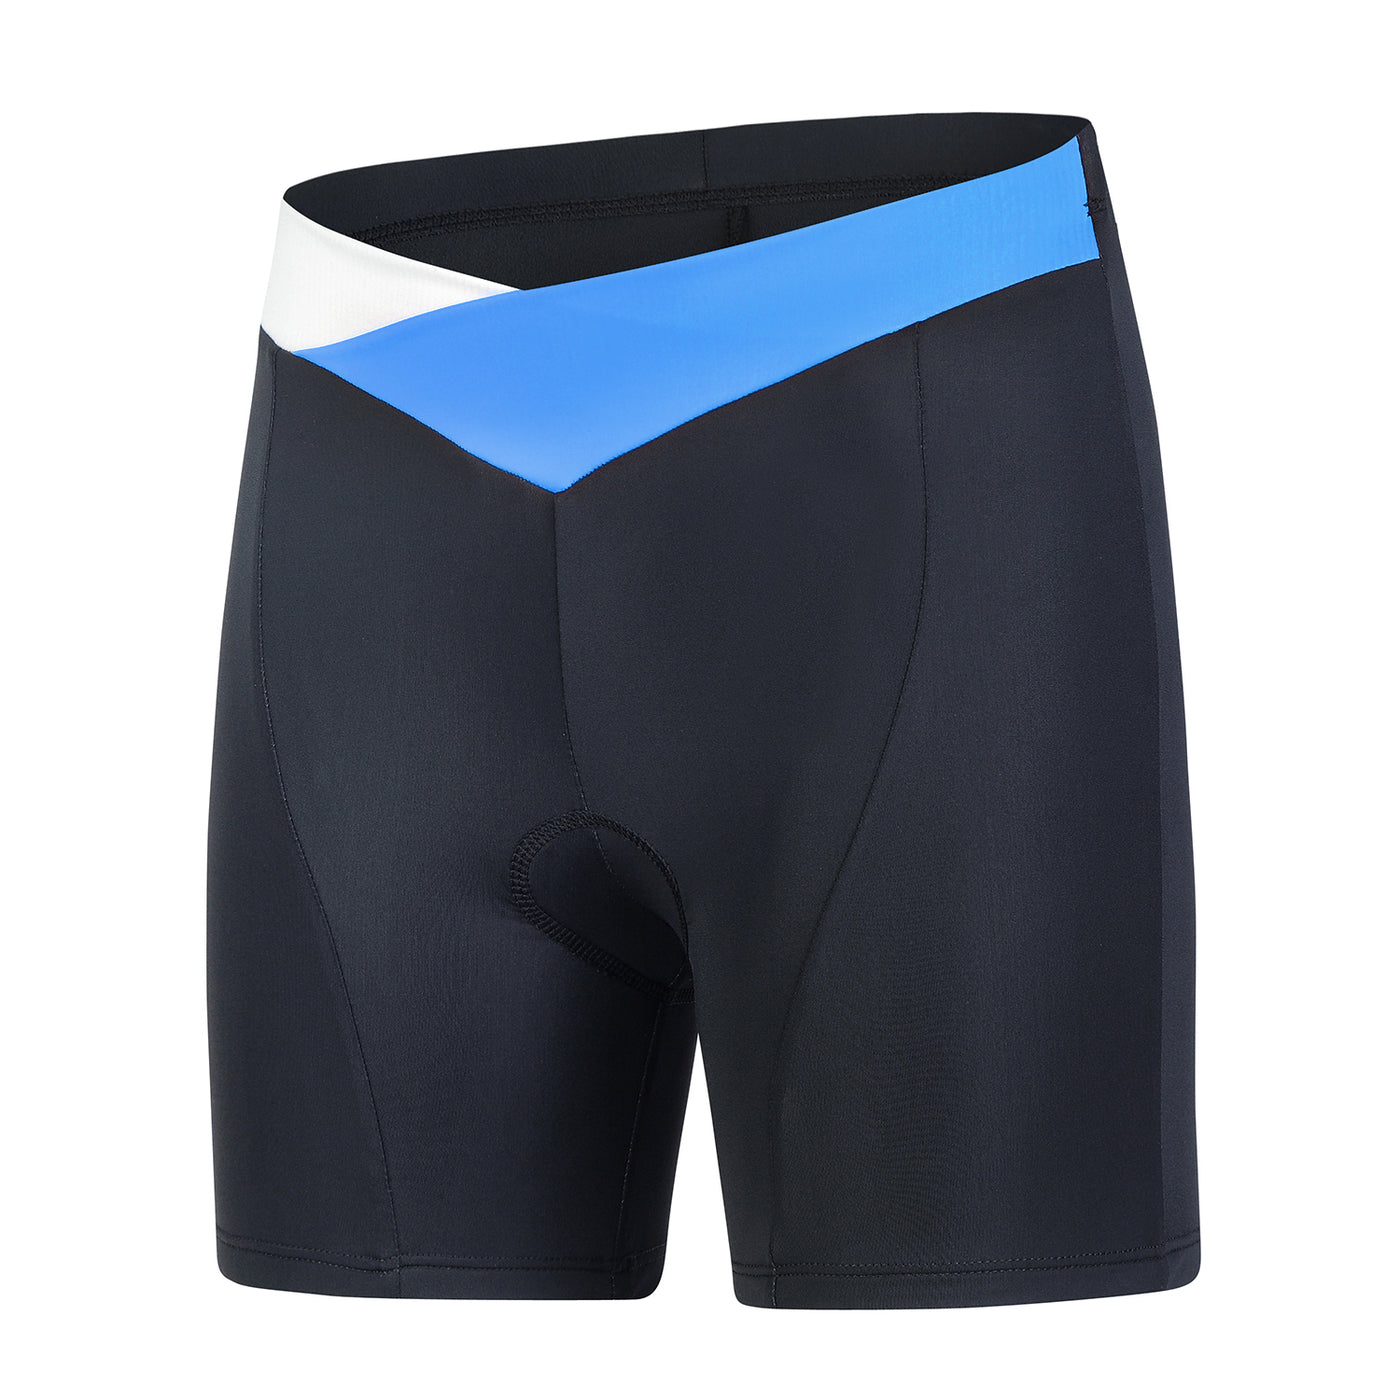 Buy Men's Cycling Shorts Padded Bicycle Underwear Mountain